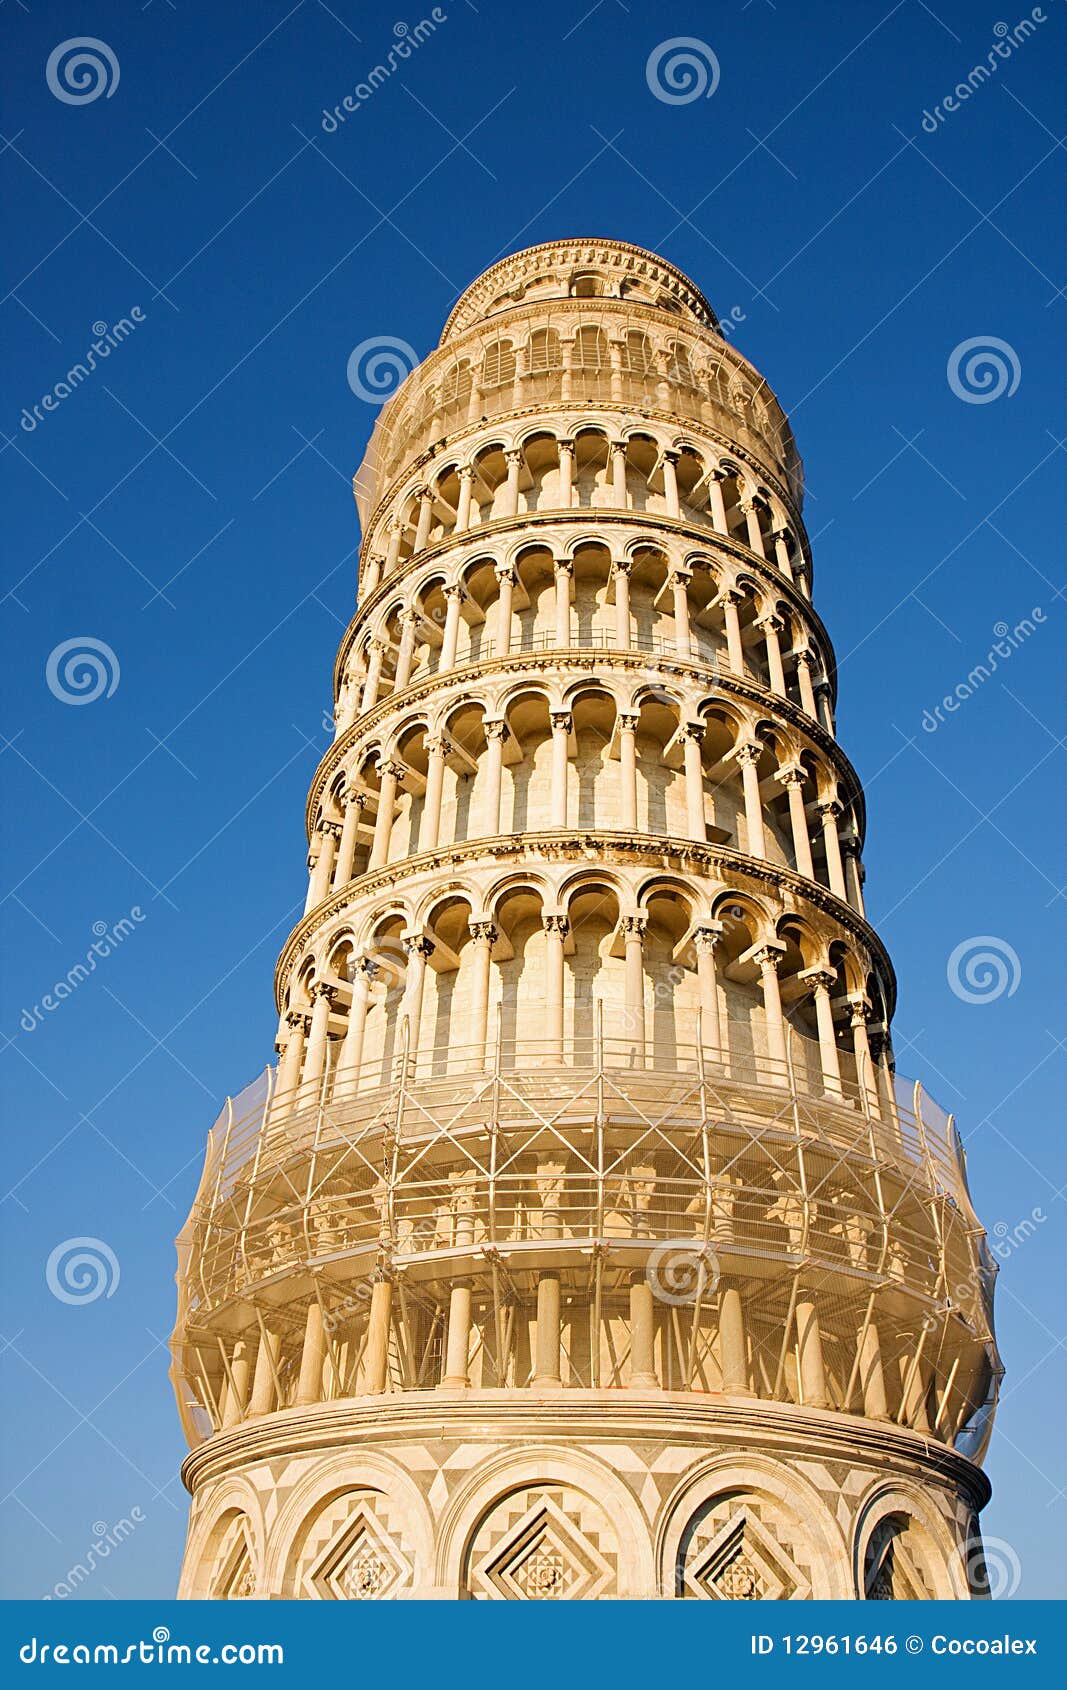 the leaning tower of pisa, italy